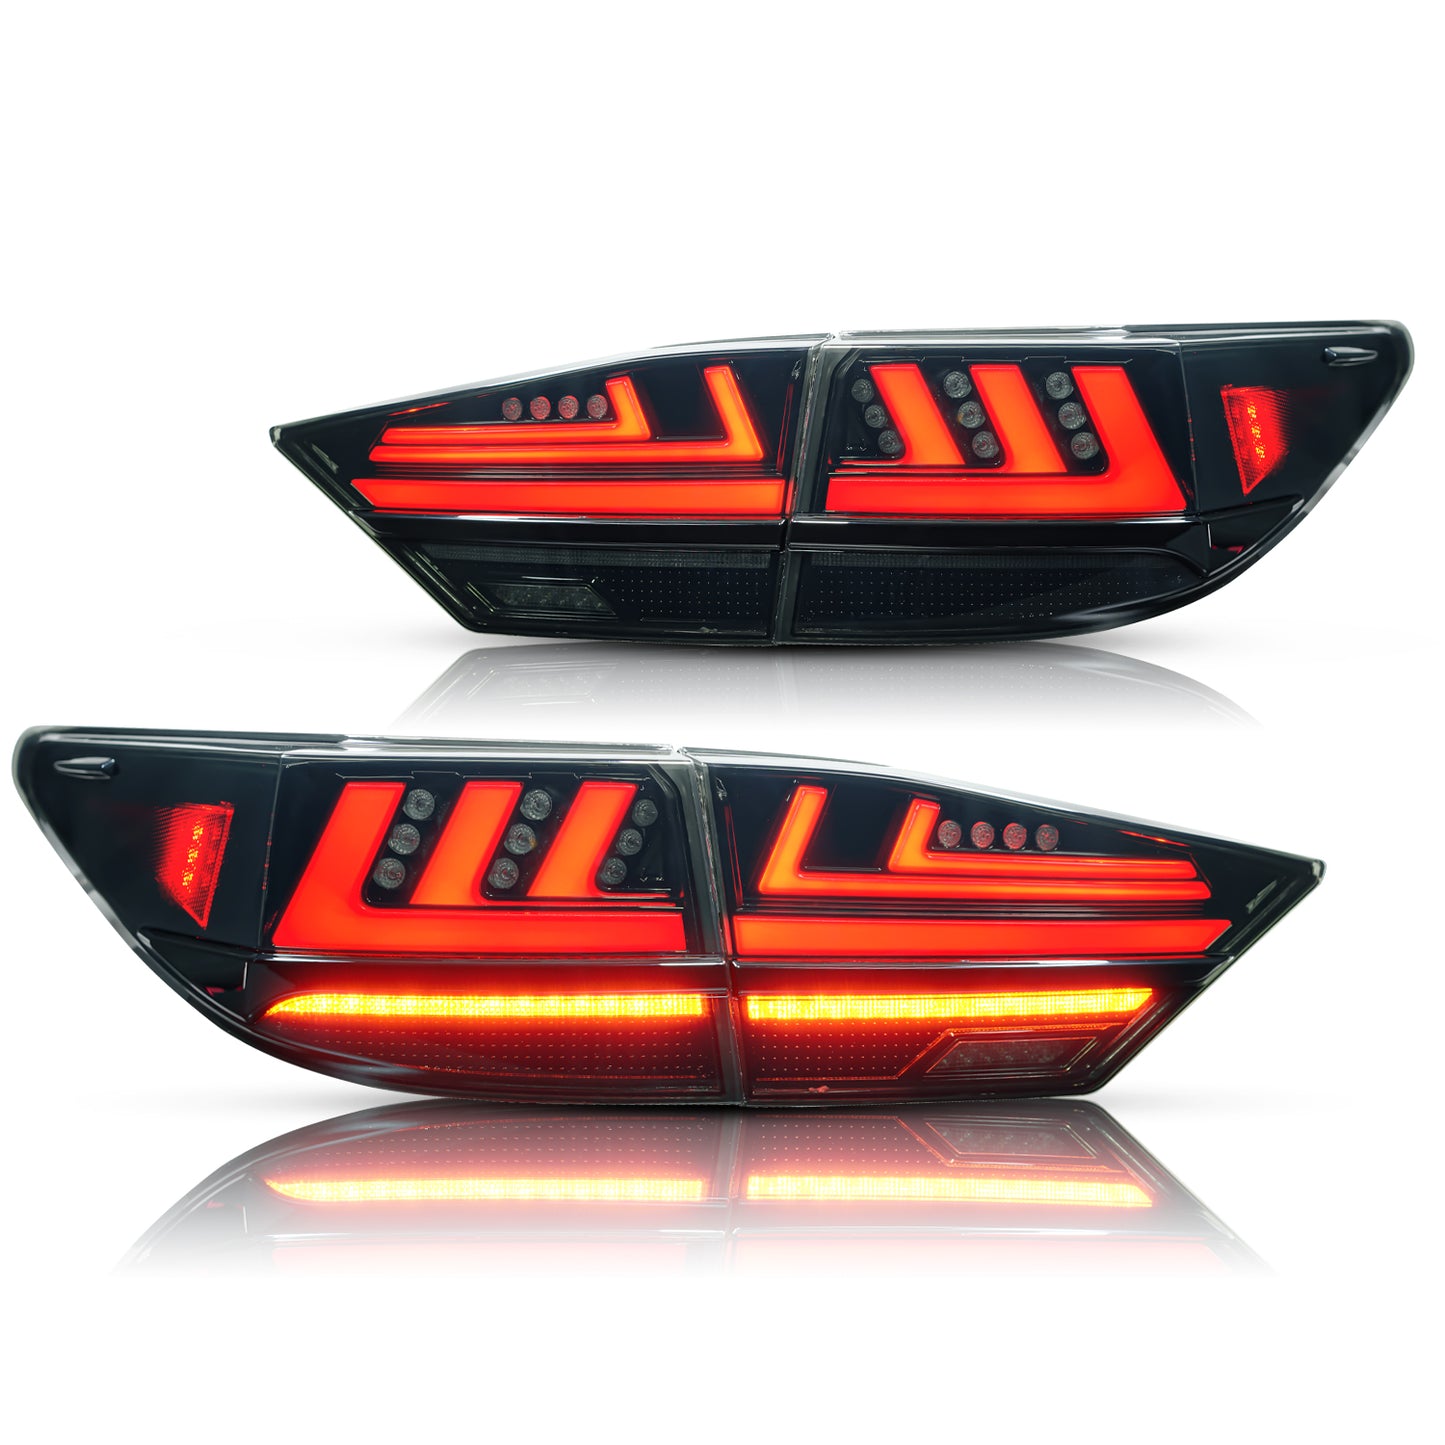 Full LED Tail Lights Assembly For Lexus ES300 2013-2017